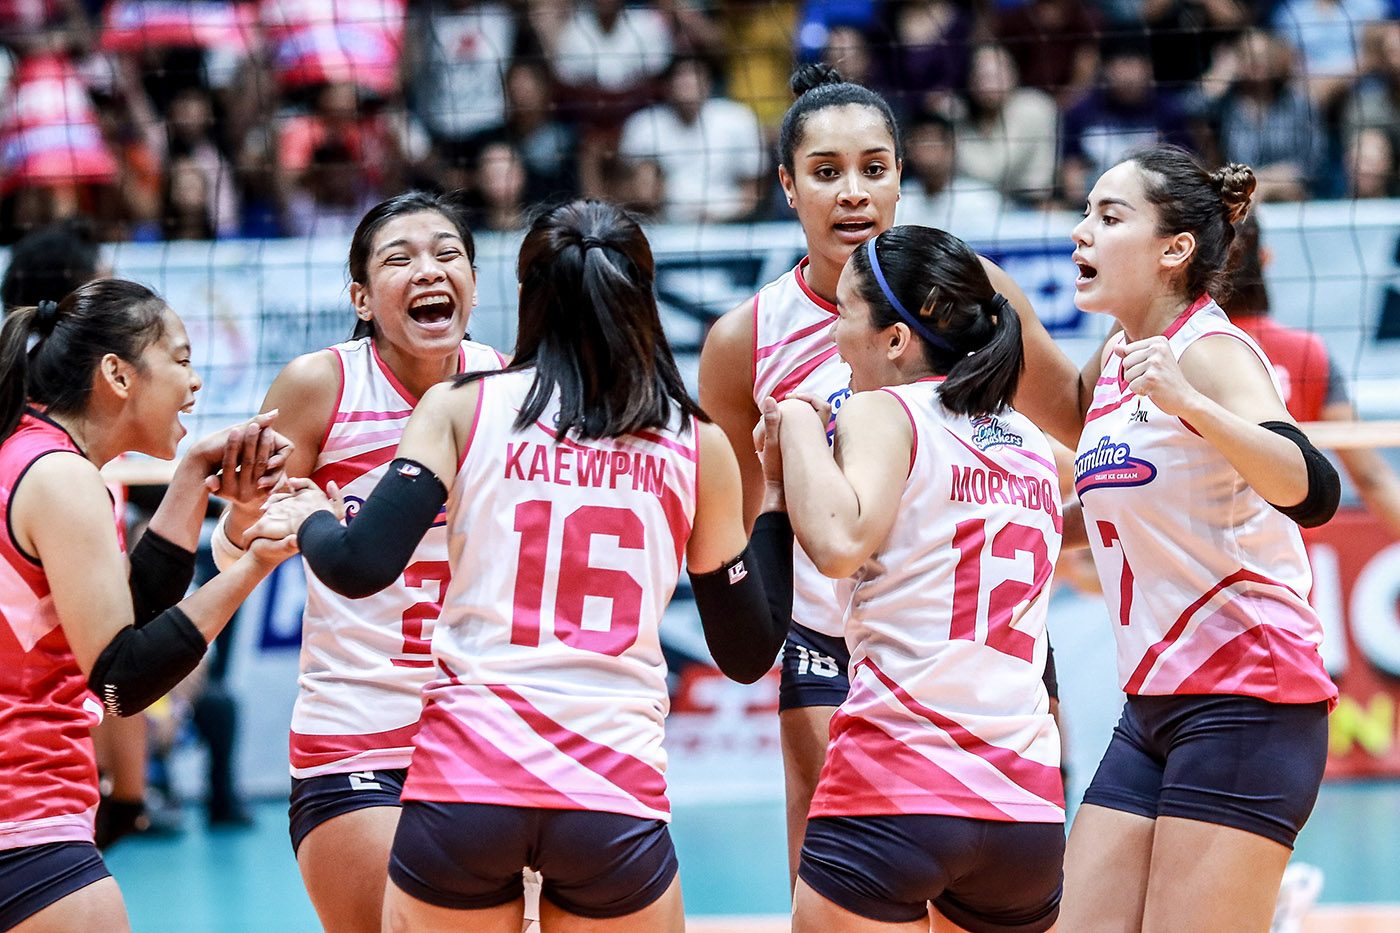 PVL 2019 team standings and schedule